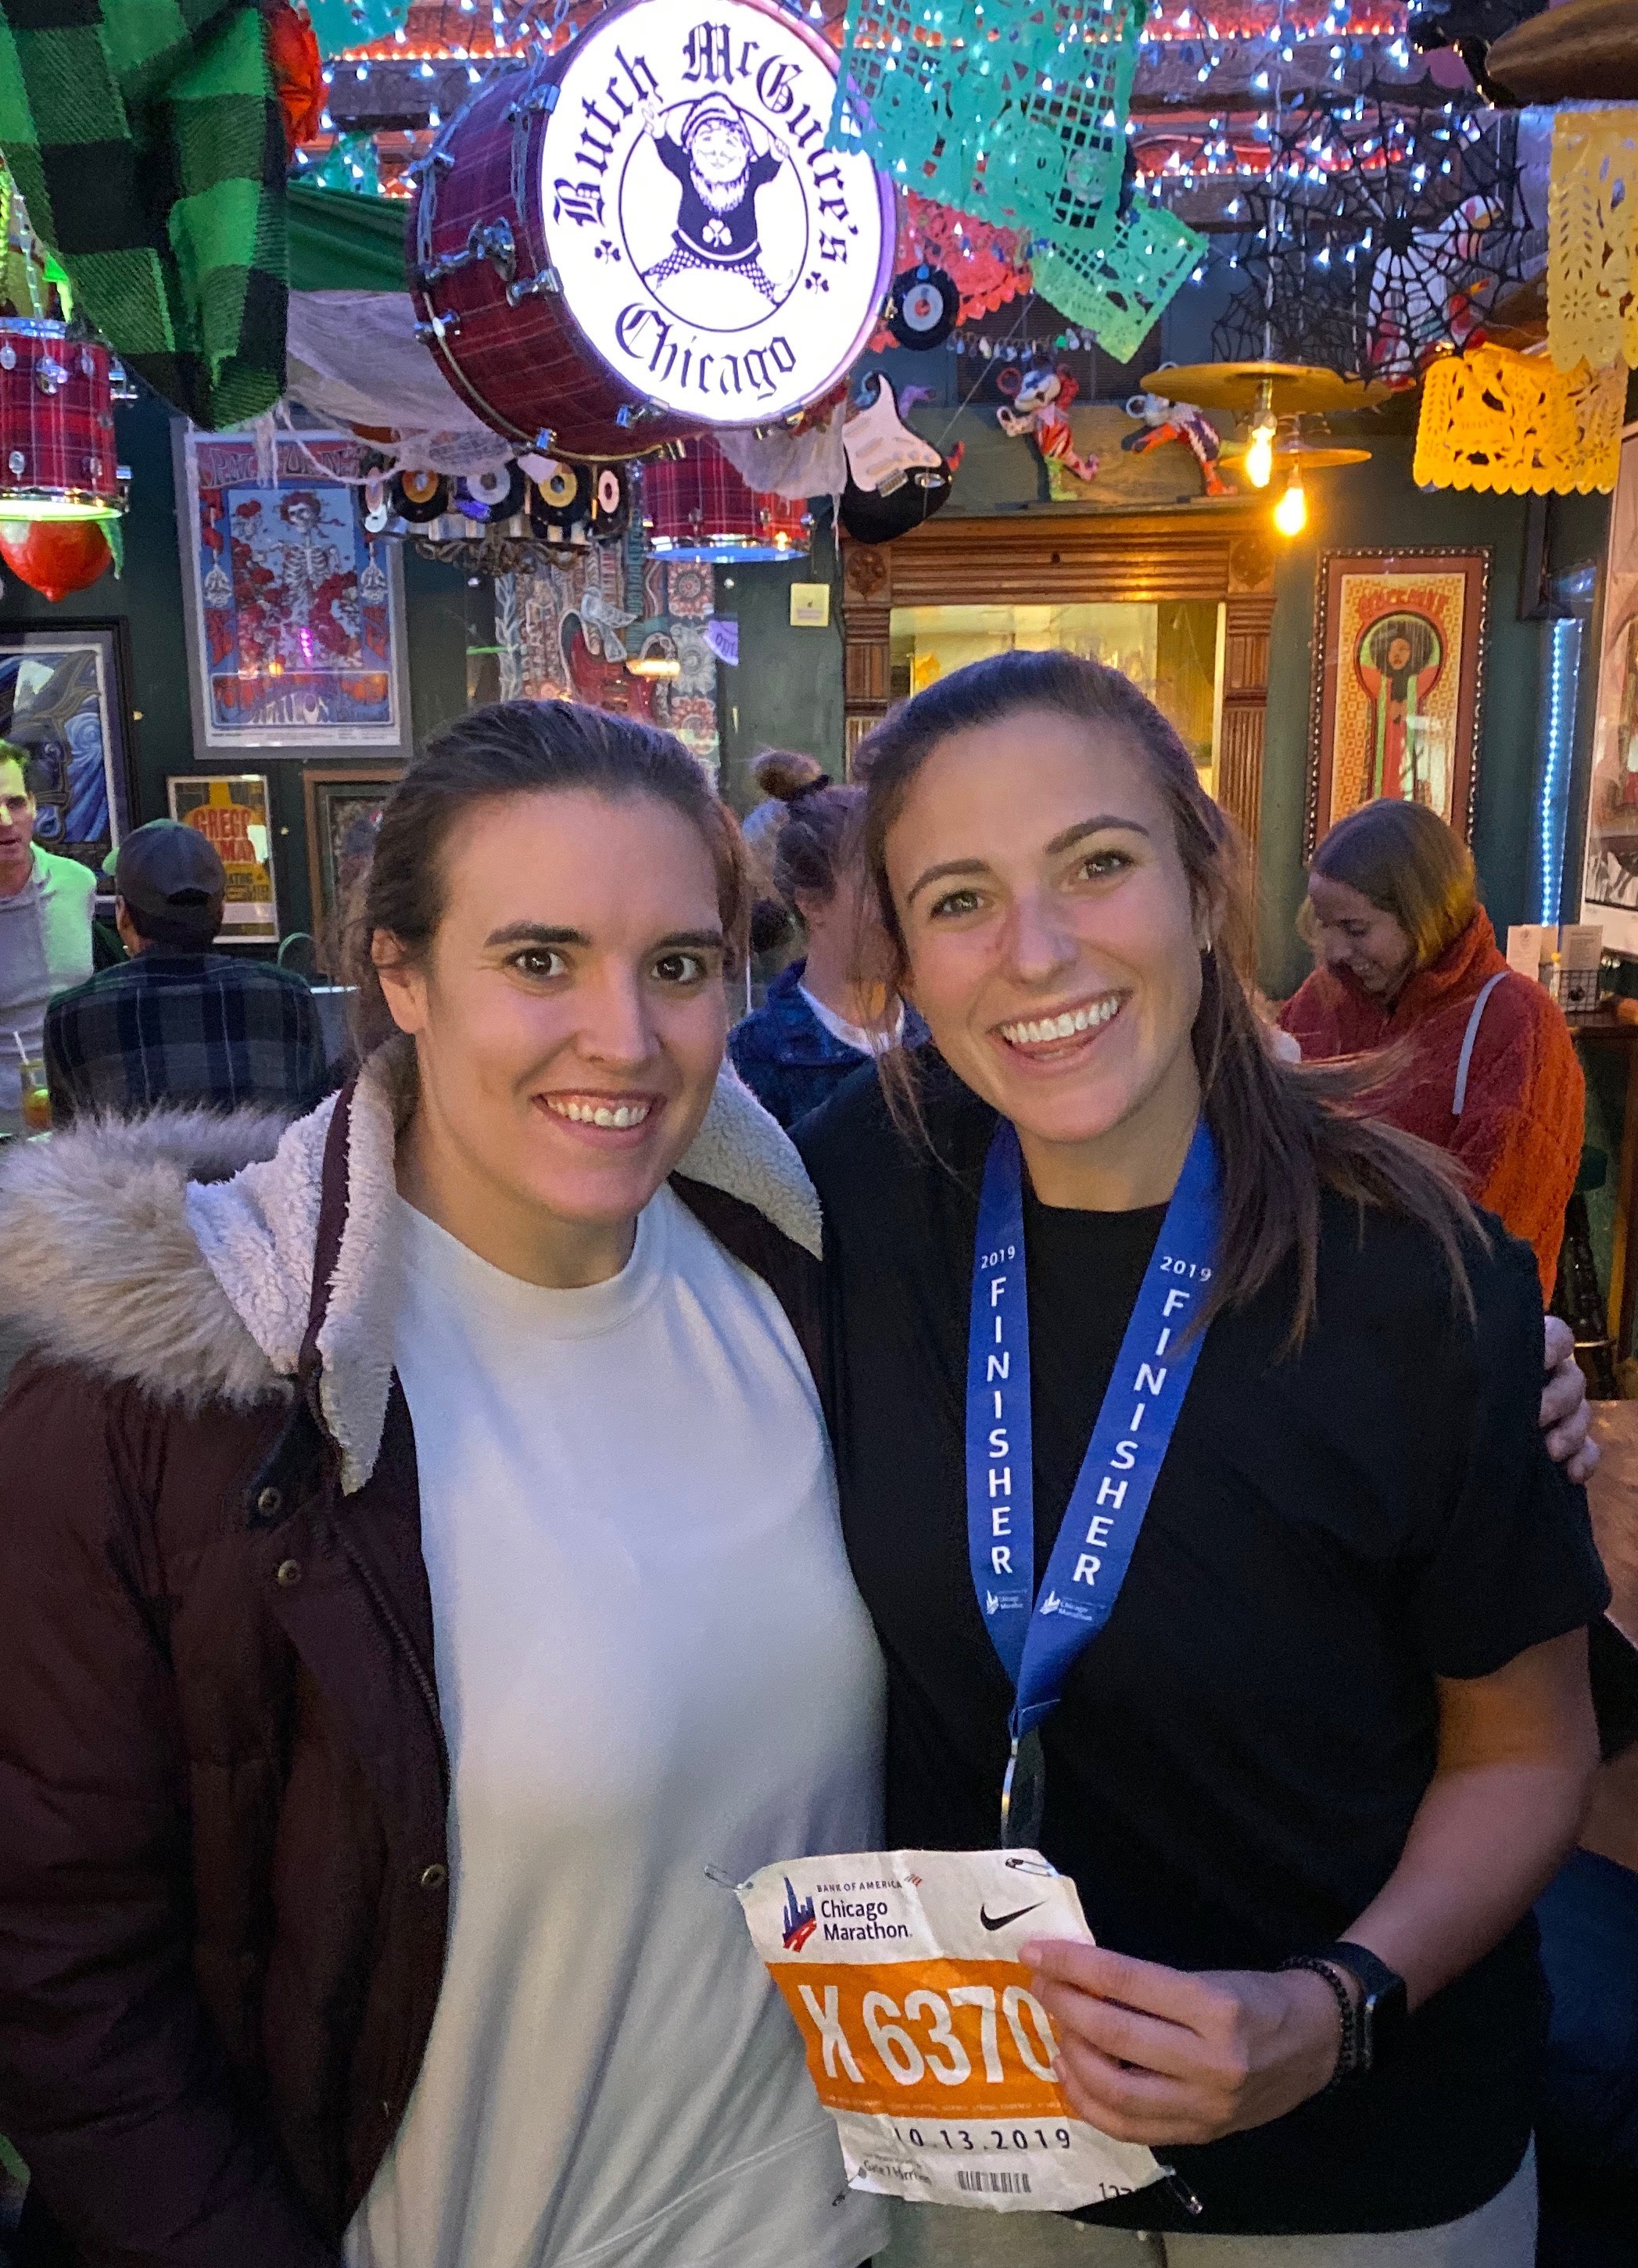 2019 Marathon for Special Olympics Chicago, with my sister Kate